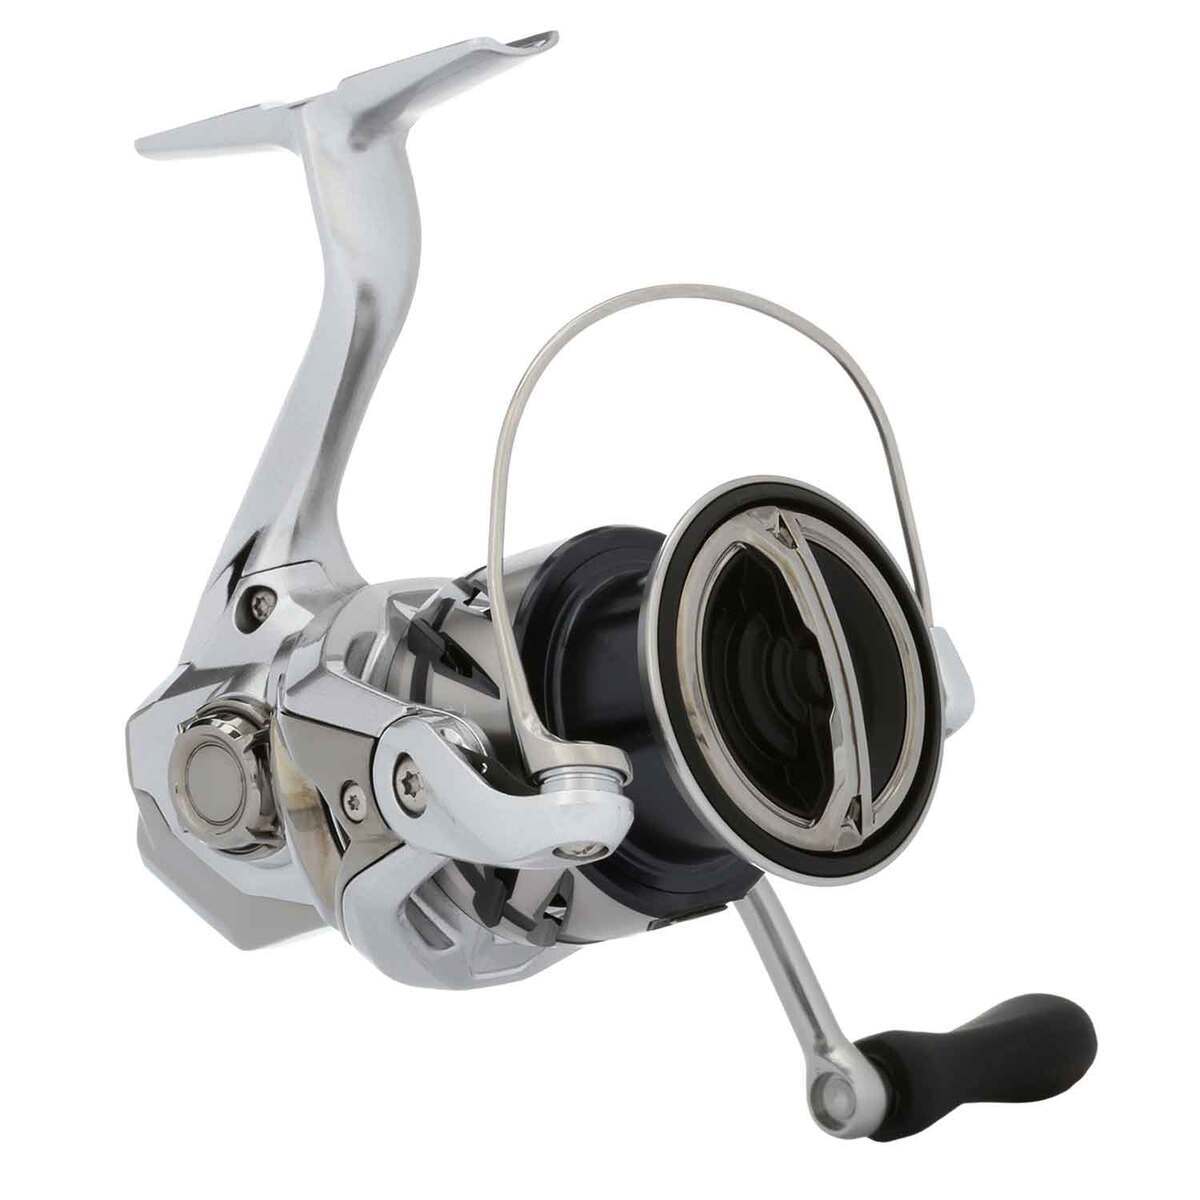 Shimano Stradic 5000 Check out this awesome reel for Cobia, Bull